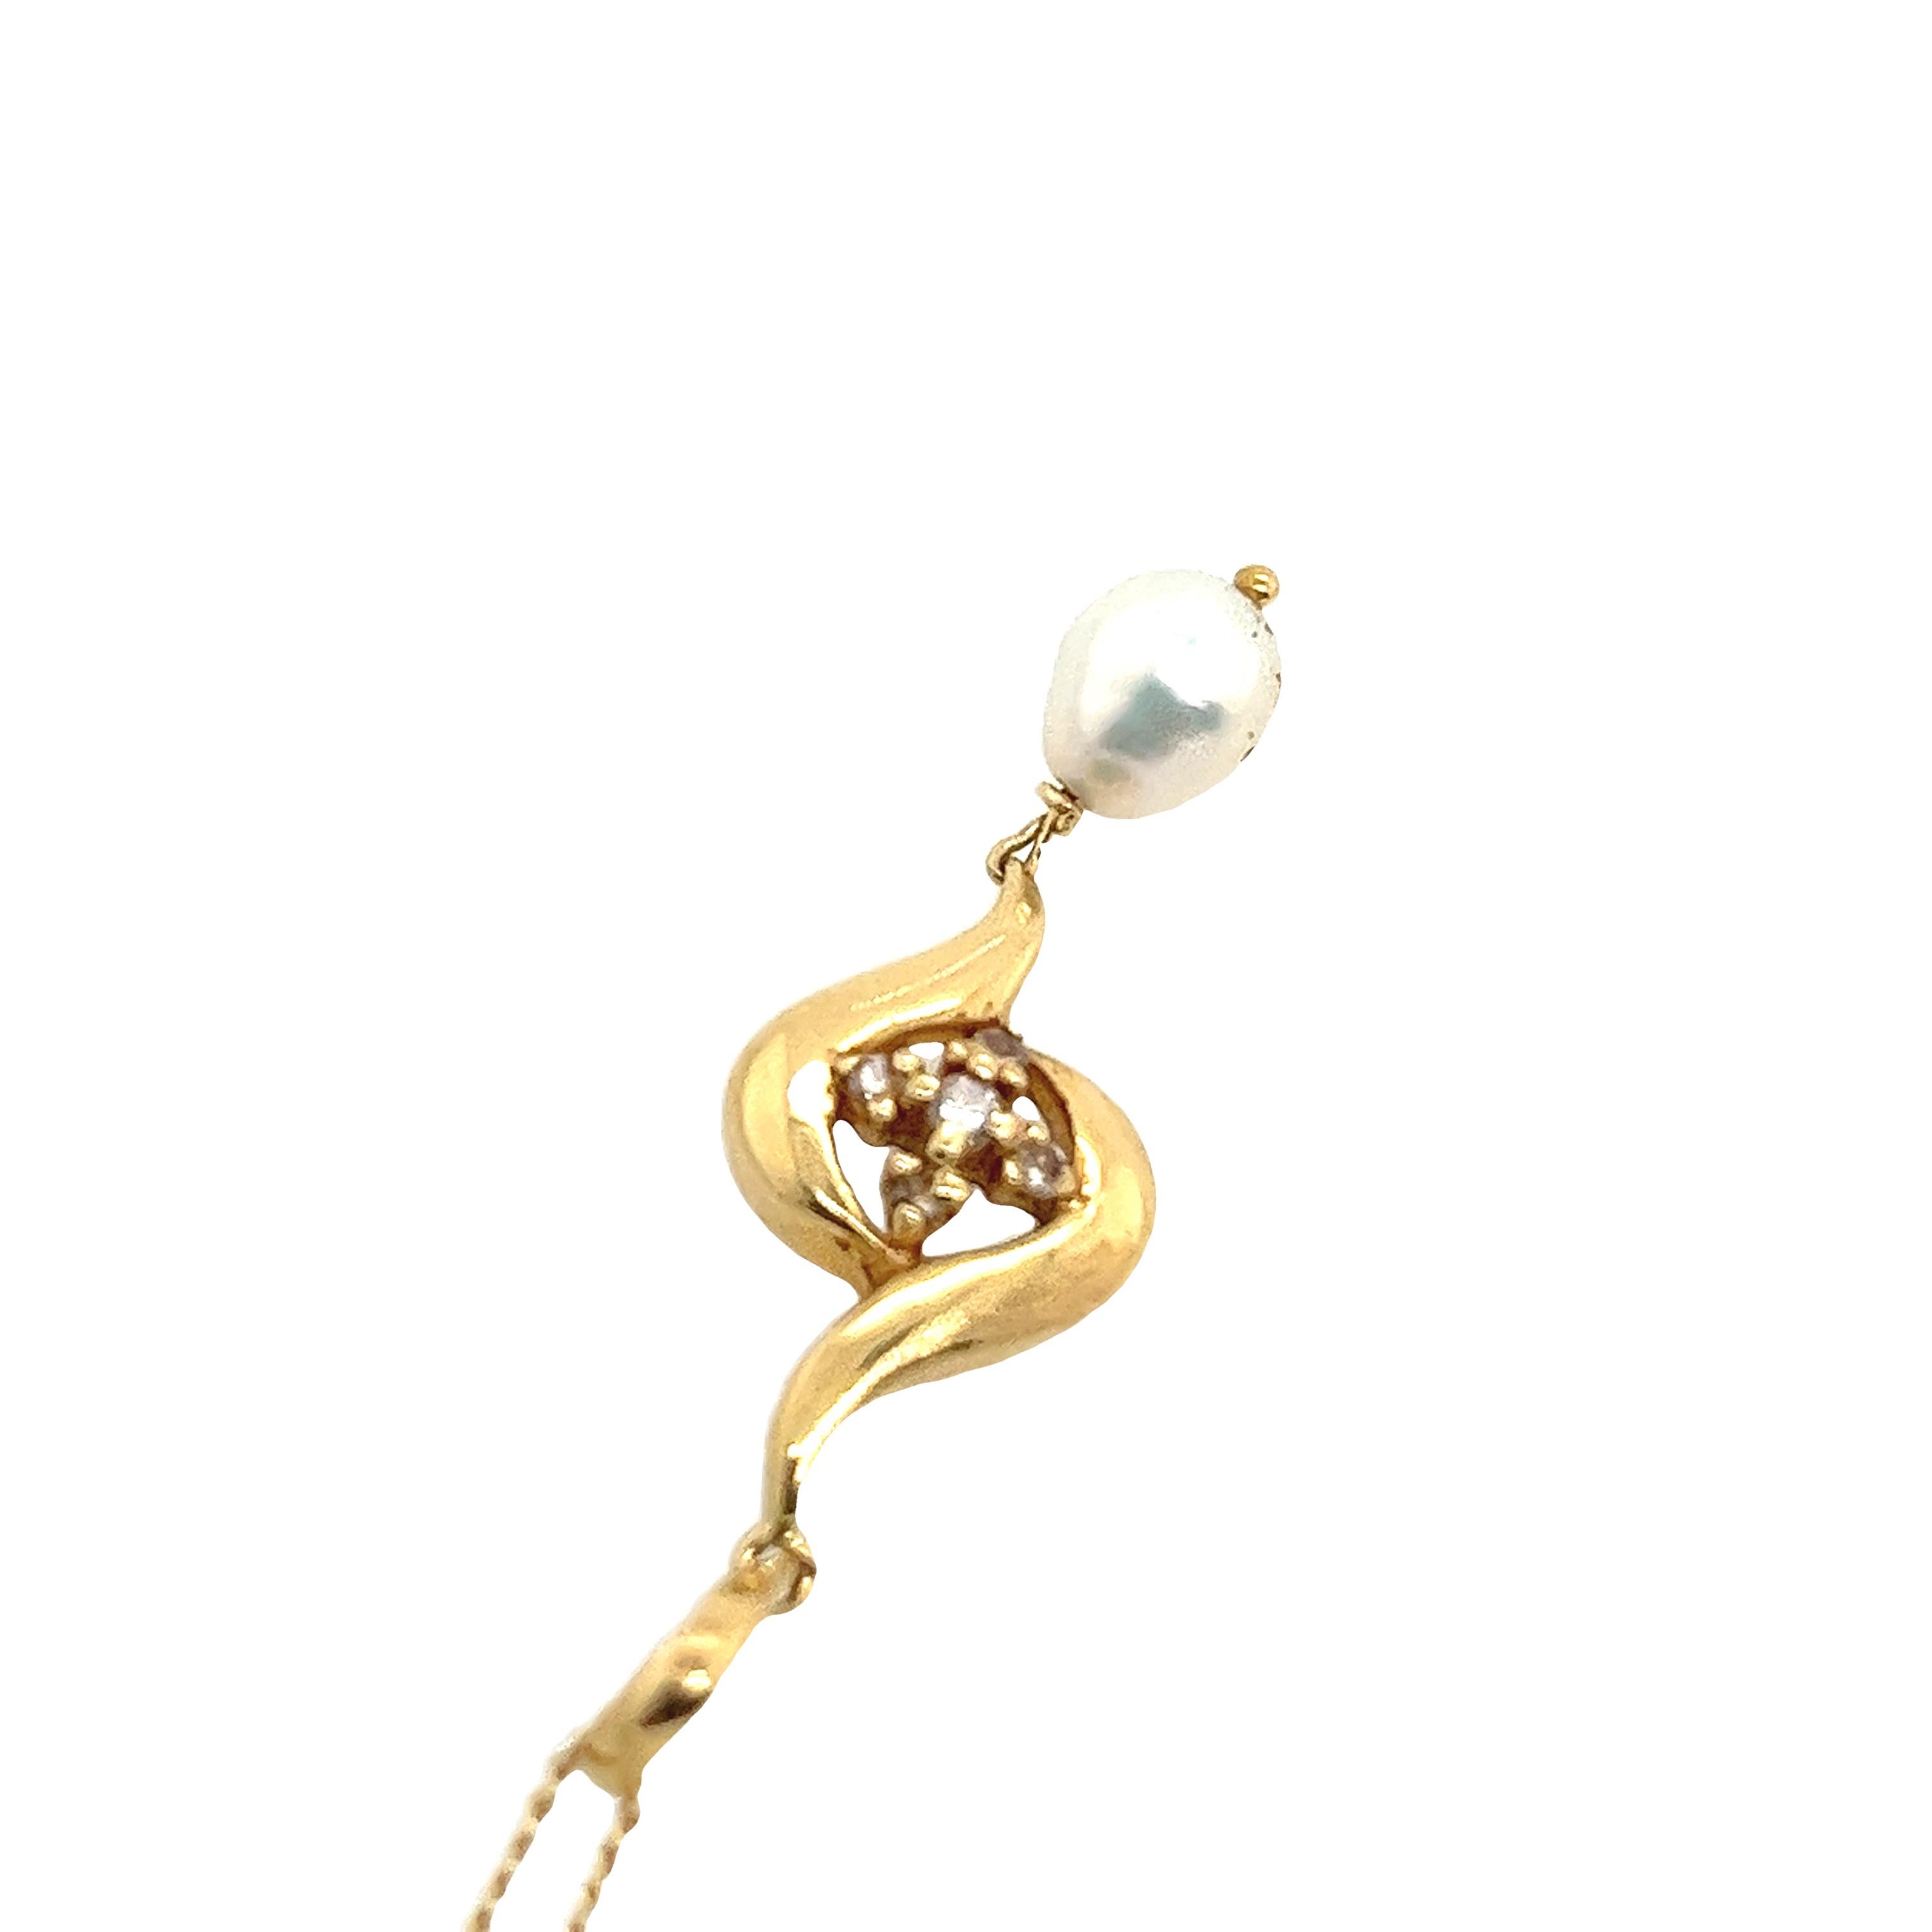 This gorgeous pearl & diamond pendant is set in 18ct yellow gold setting. The pendant is suspended from a 18ct yellow gold chain that measures 18 inches.

Item Length: 18